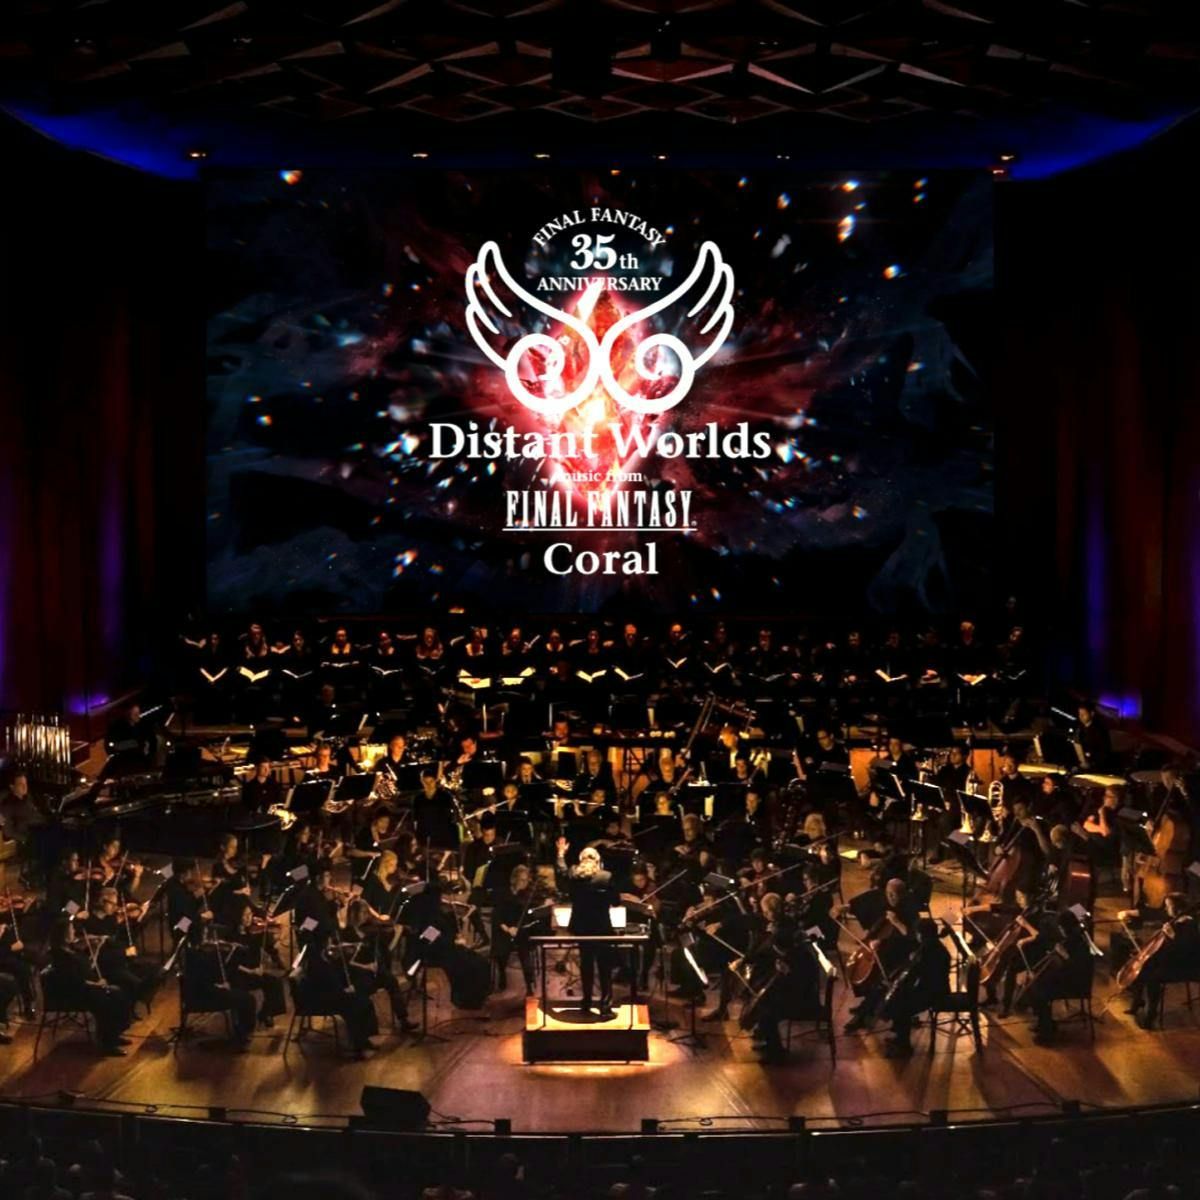 Distant Worlds - Music from Final Fantasy (Concert)